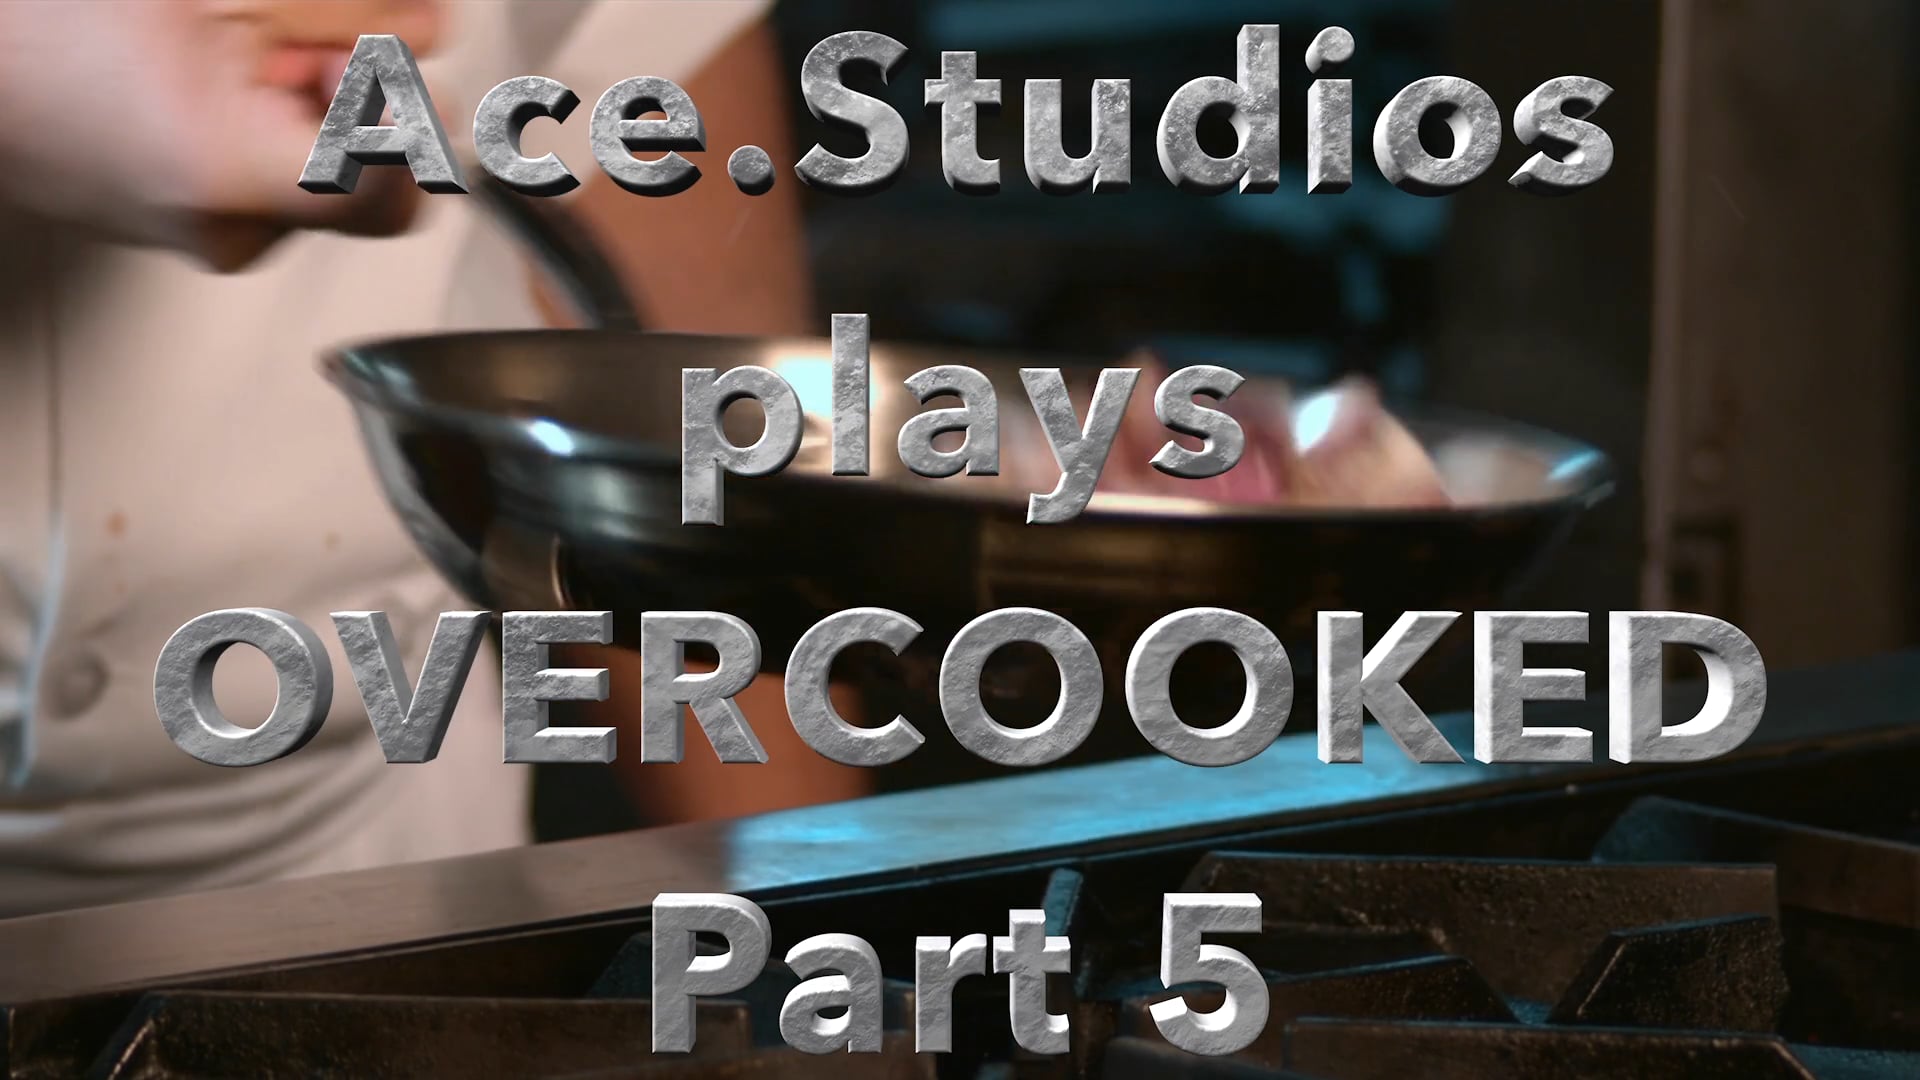 Ace.studios Plays Overcooked Part 5